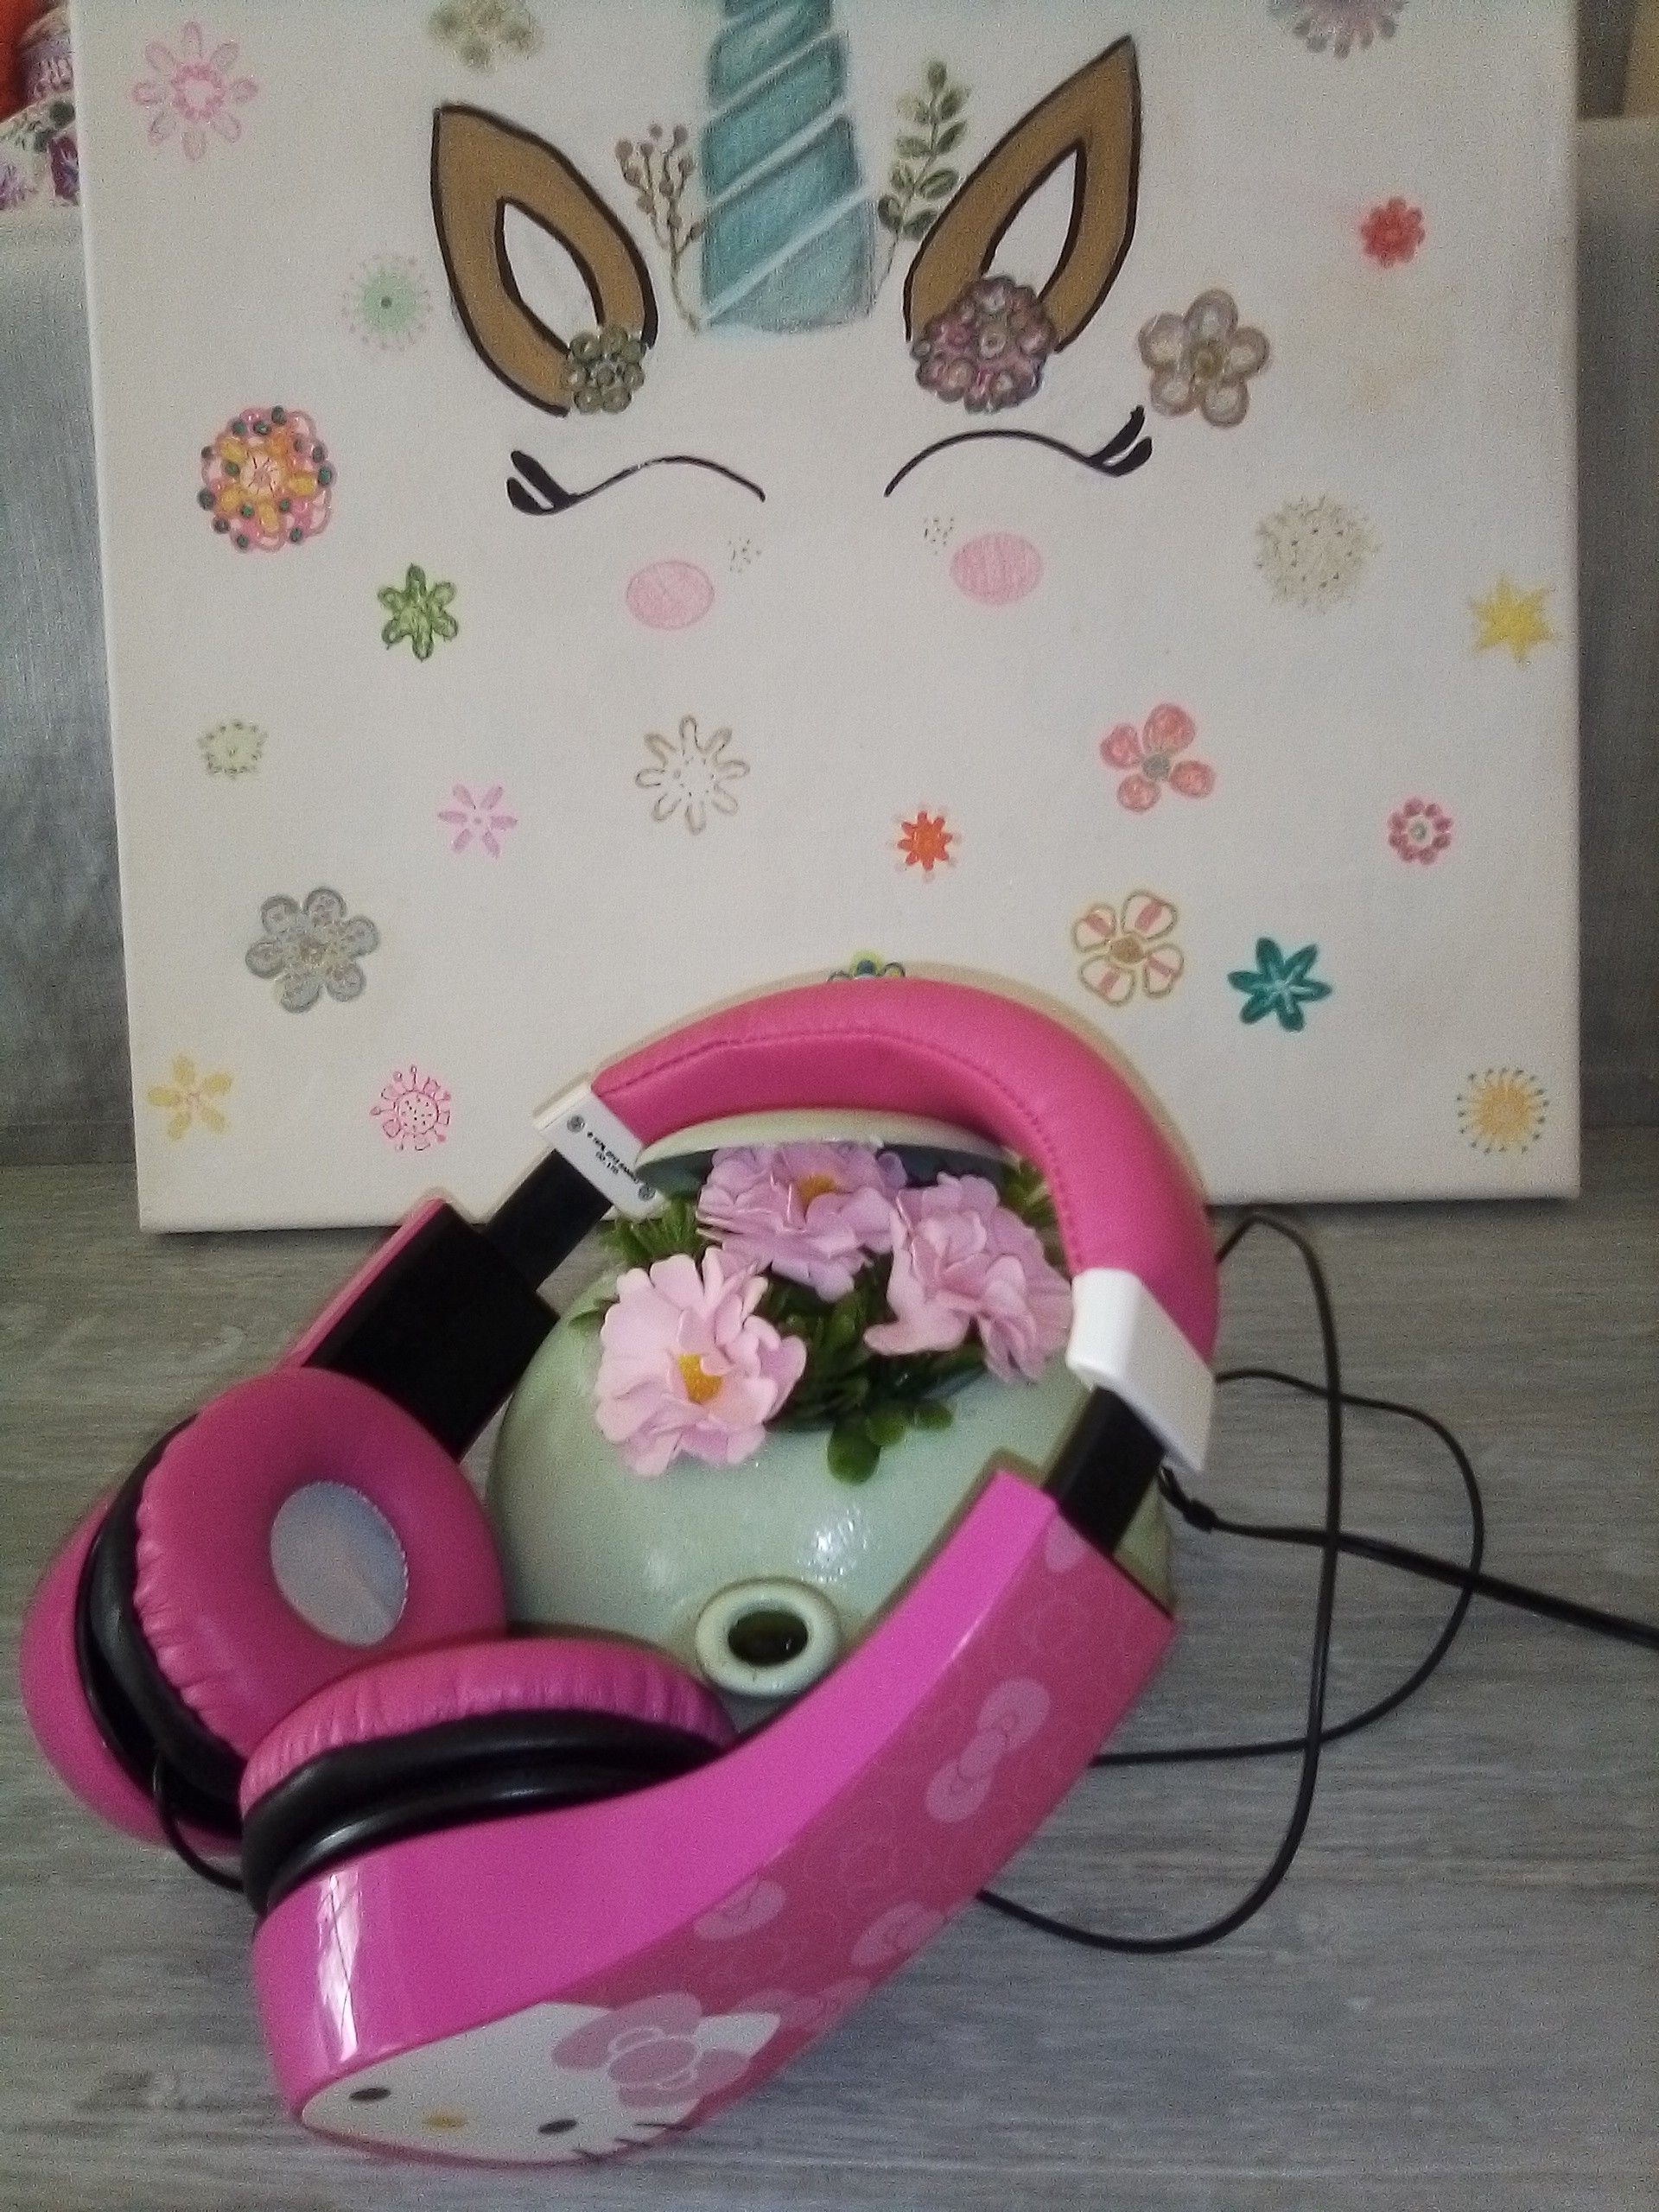 Little girls hello Kitty headphones canvas with unicorn and teakettle Deco , all for $5